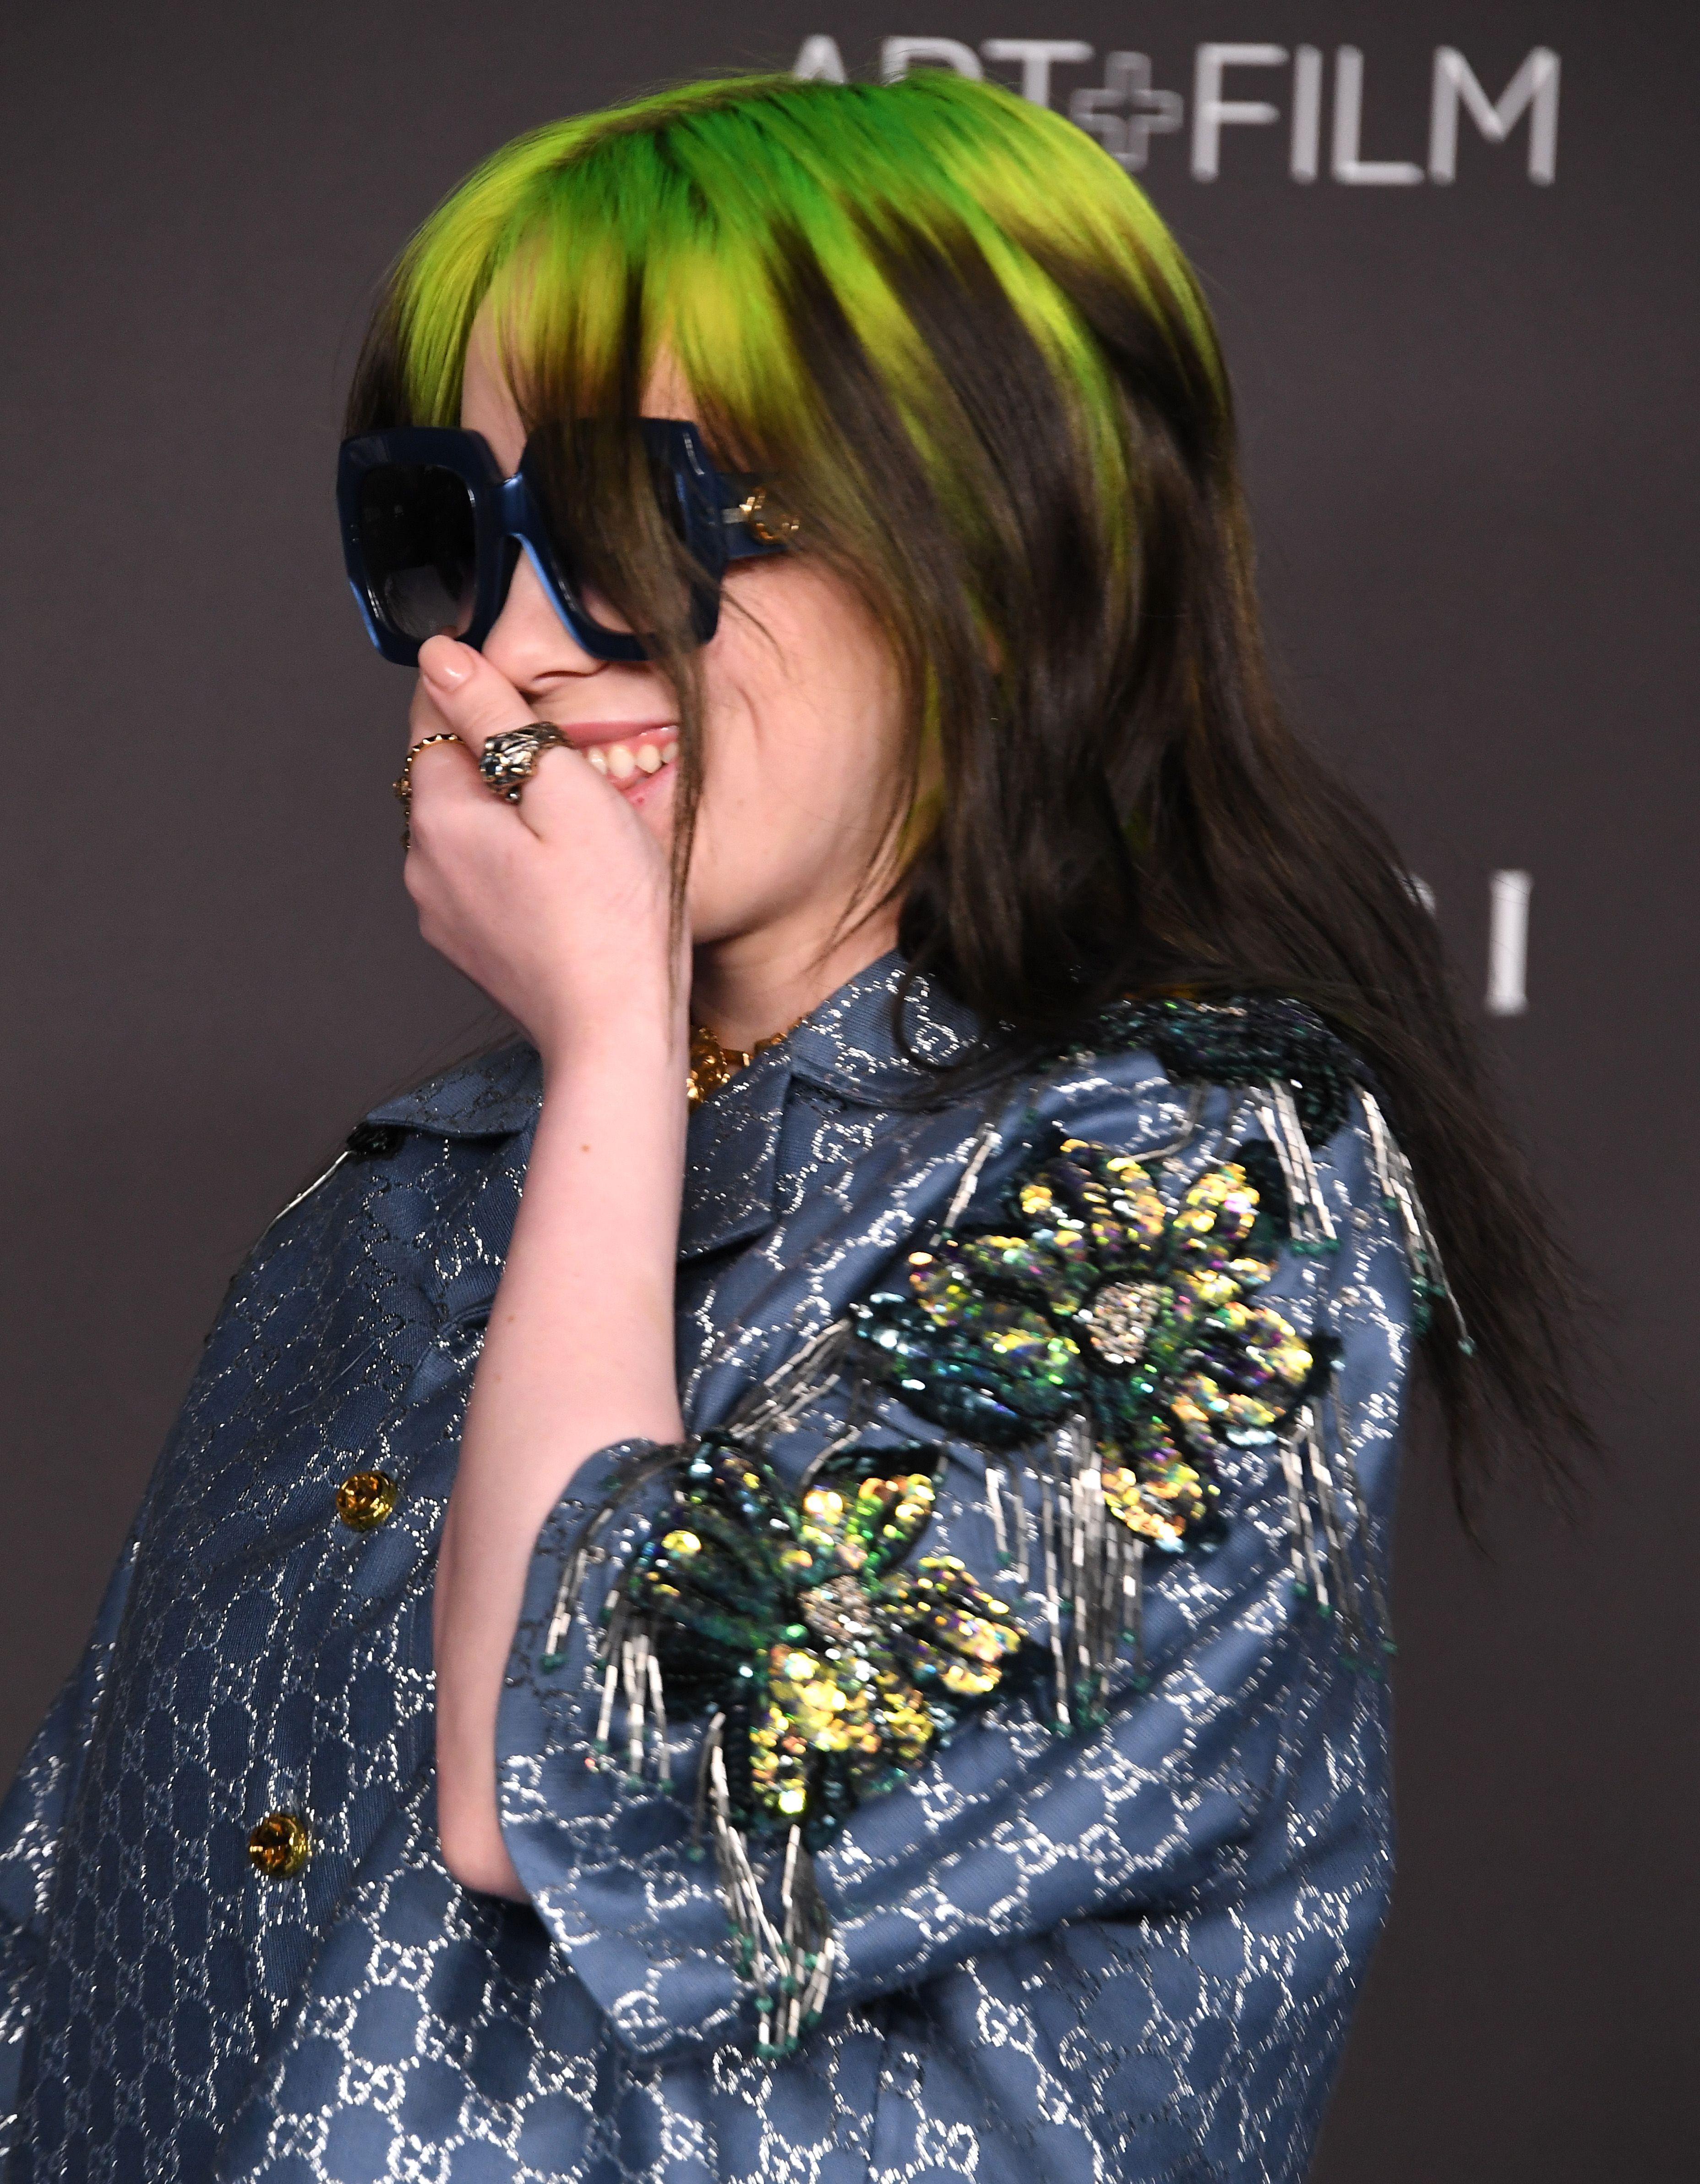 Billie Eilish just got a new mullet haircut and we're into it